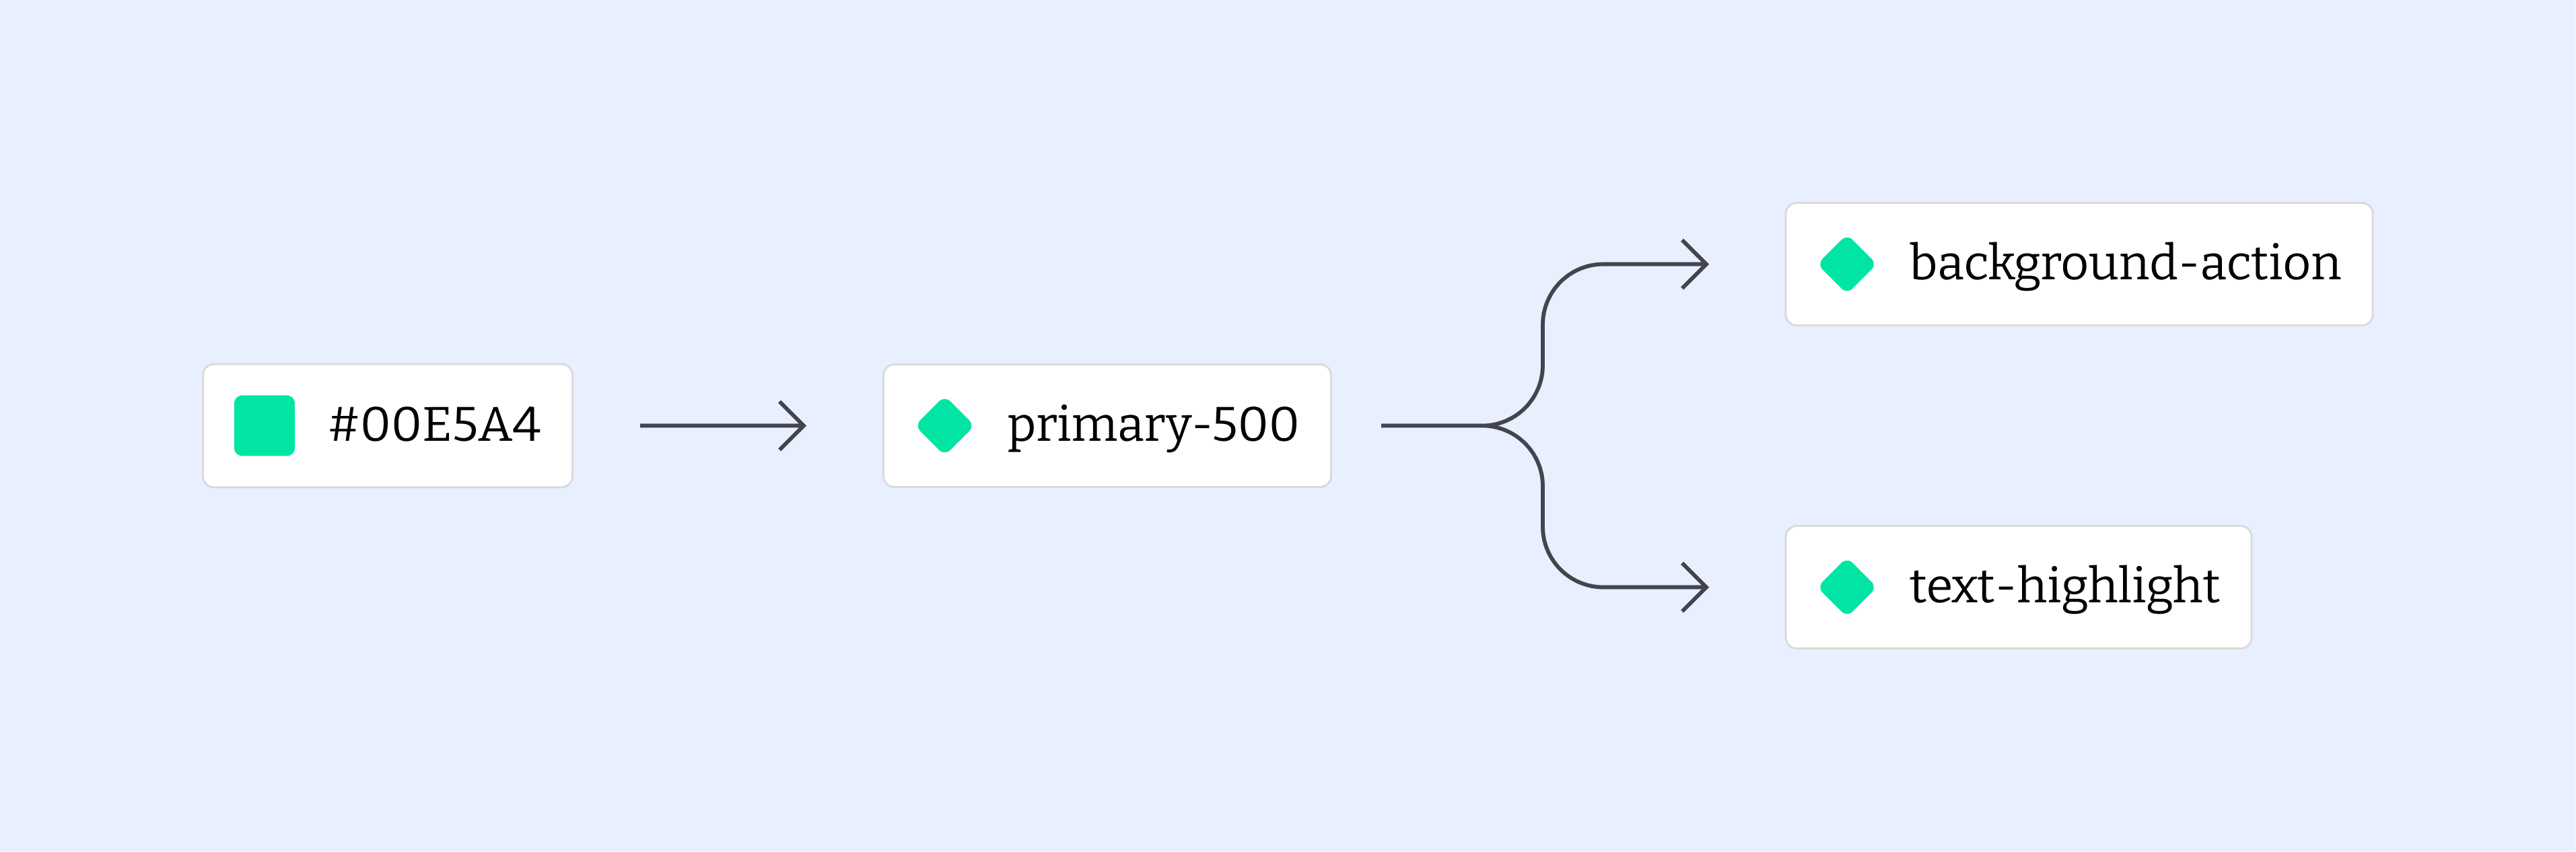 Design Token Sample Structure - #00E5A4 to primary-500 to contextual names (background-action, and text-highlight)